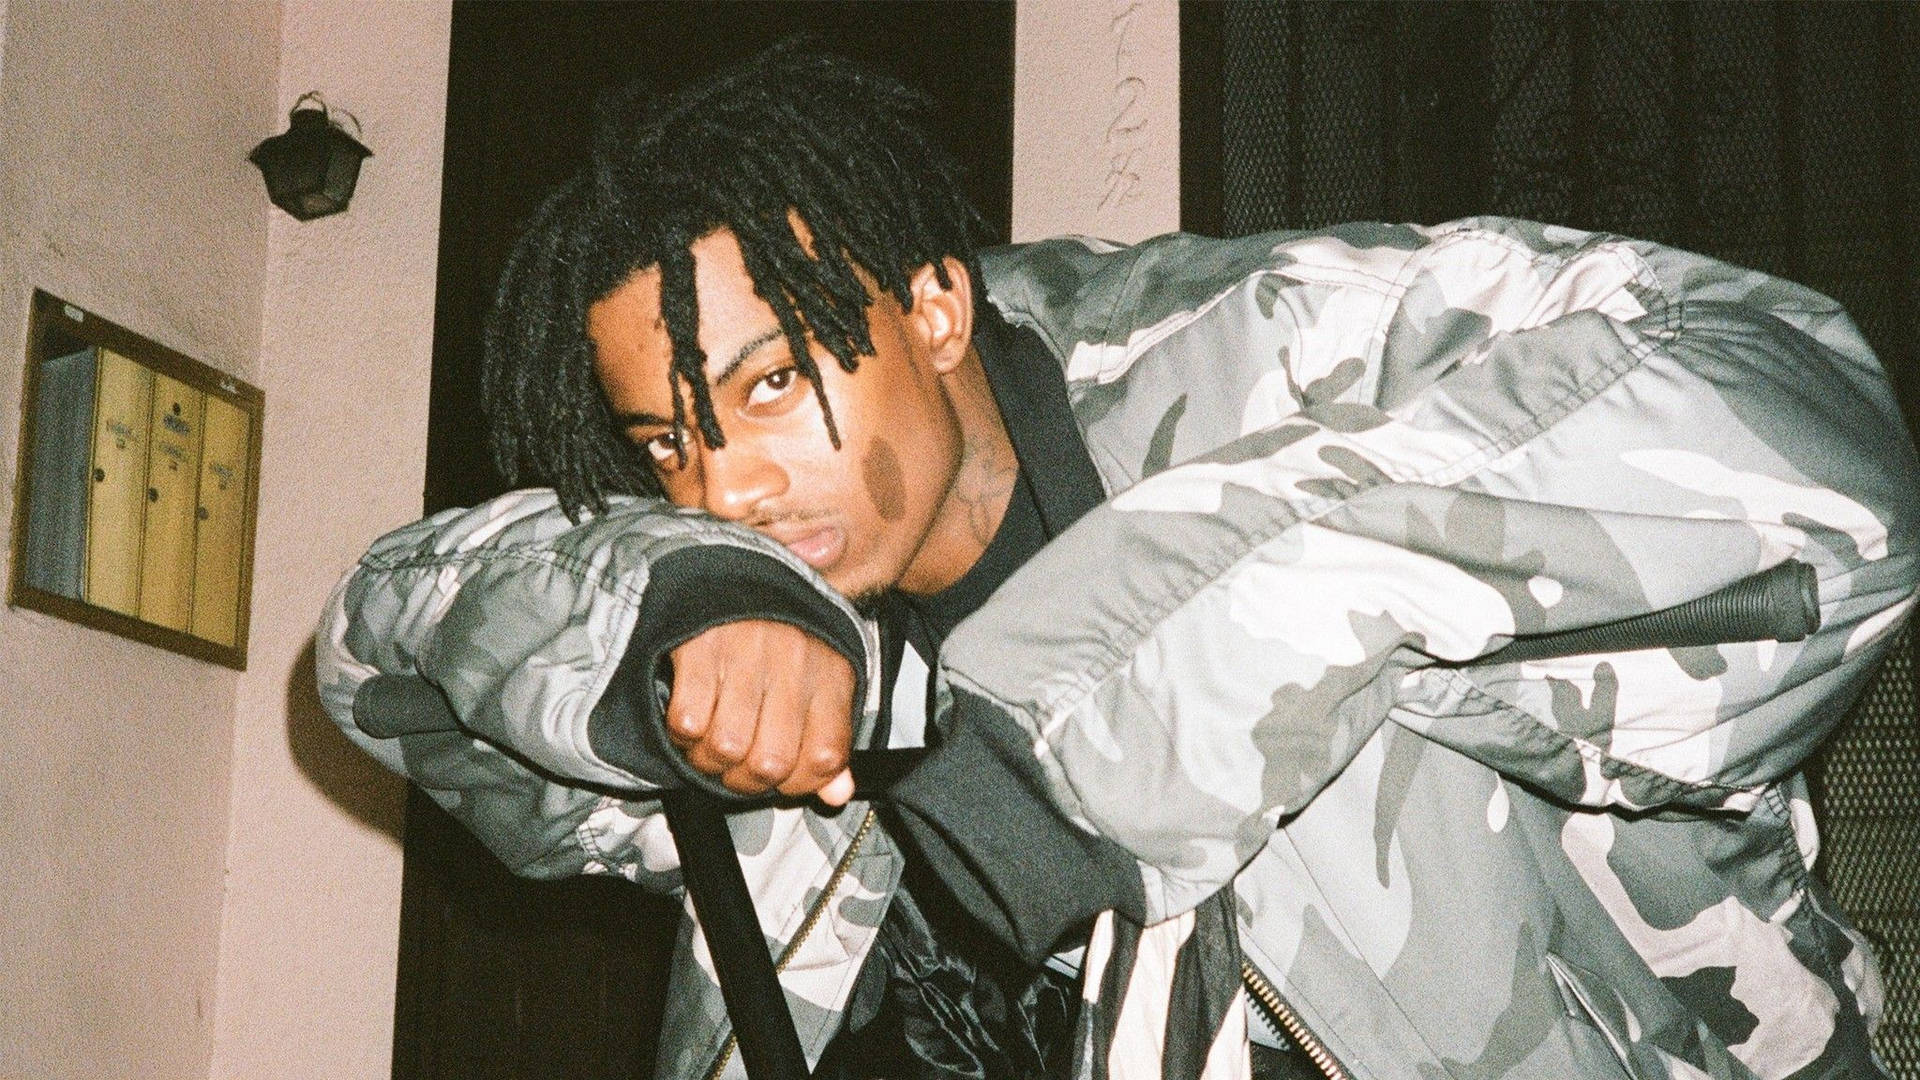 Playboi Carti Looking Cool And Laid Back. Background